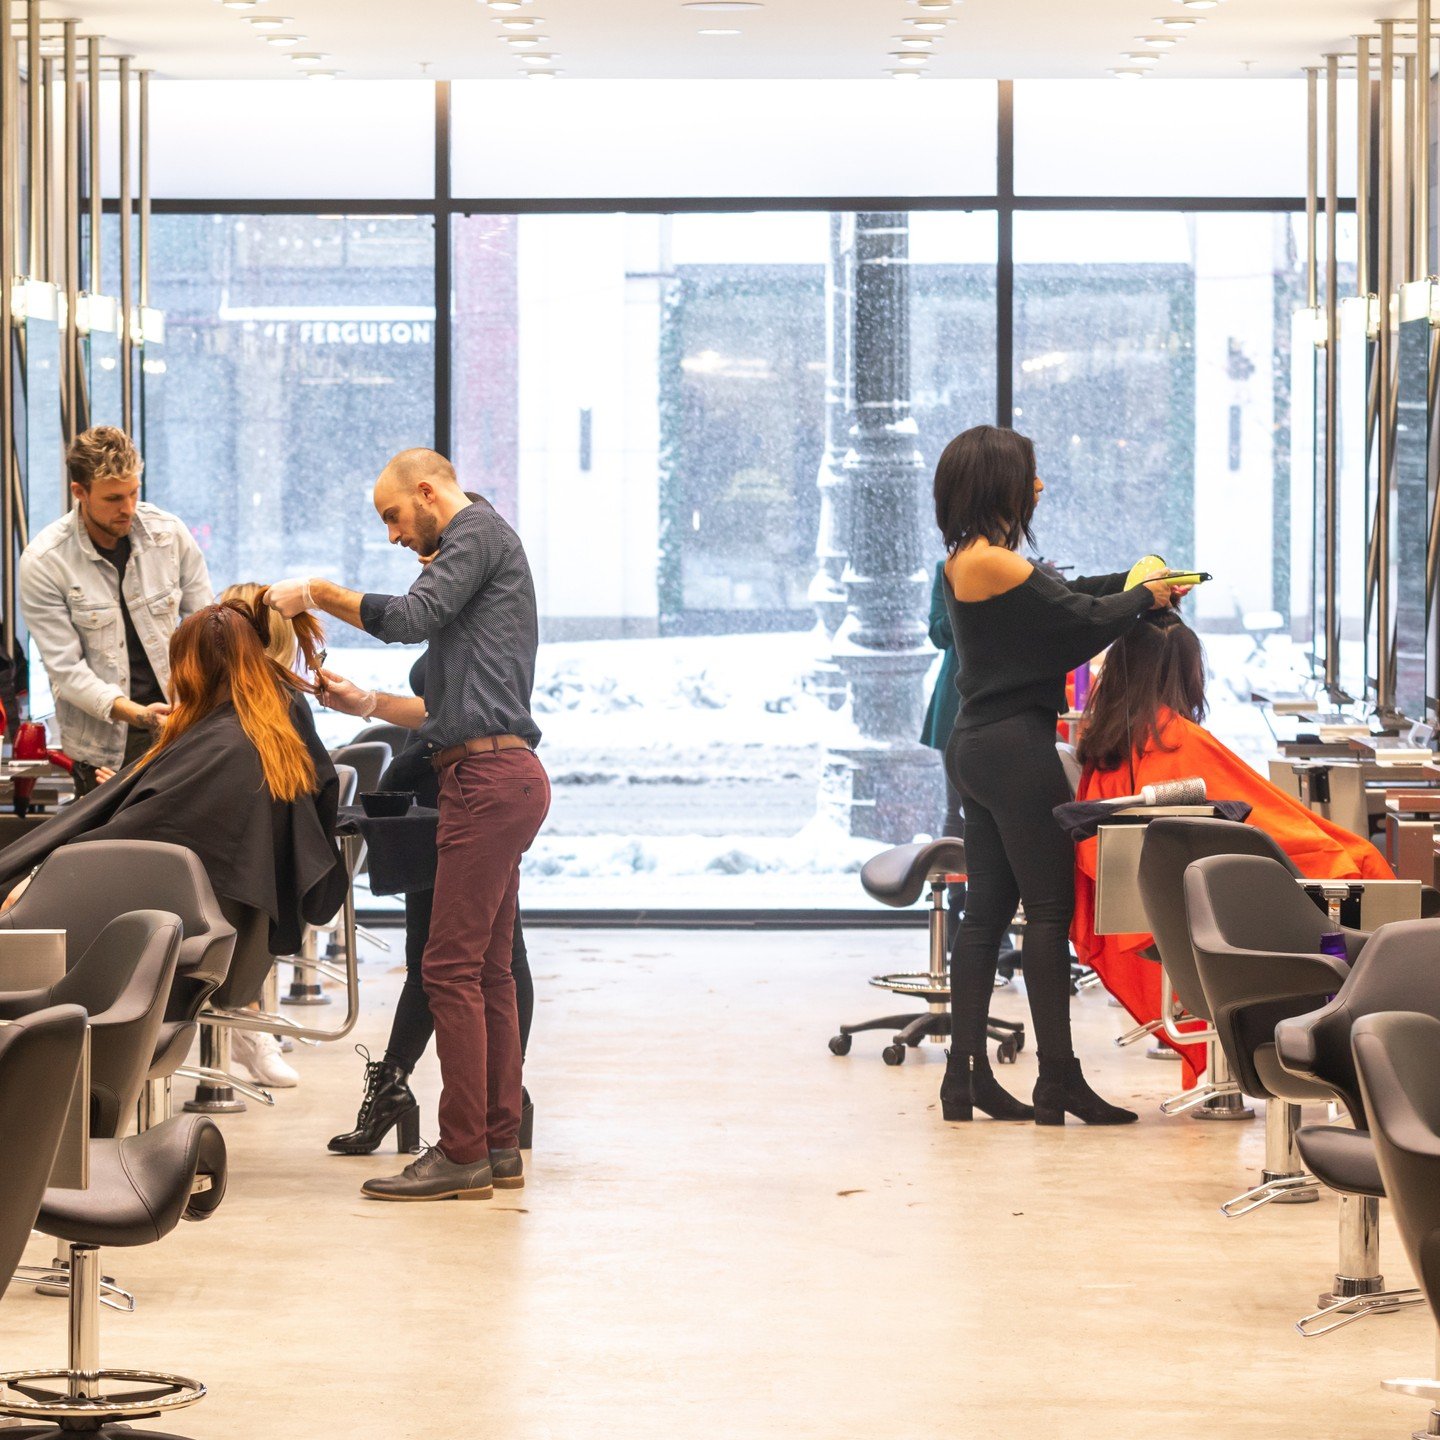 Part 2 of tenant Draft specials in #DowntownDetroit! 

💈 @6_salon: Pair a blowout with a permanent bracelet from @halieandco pop-up outside the salon, open between noon and 7 p.m. Thursday, April 25 and Friday, April 26, with extended hours on Satur